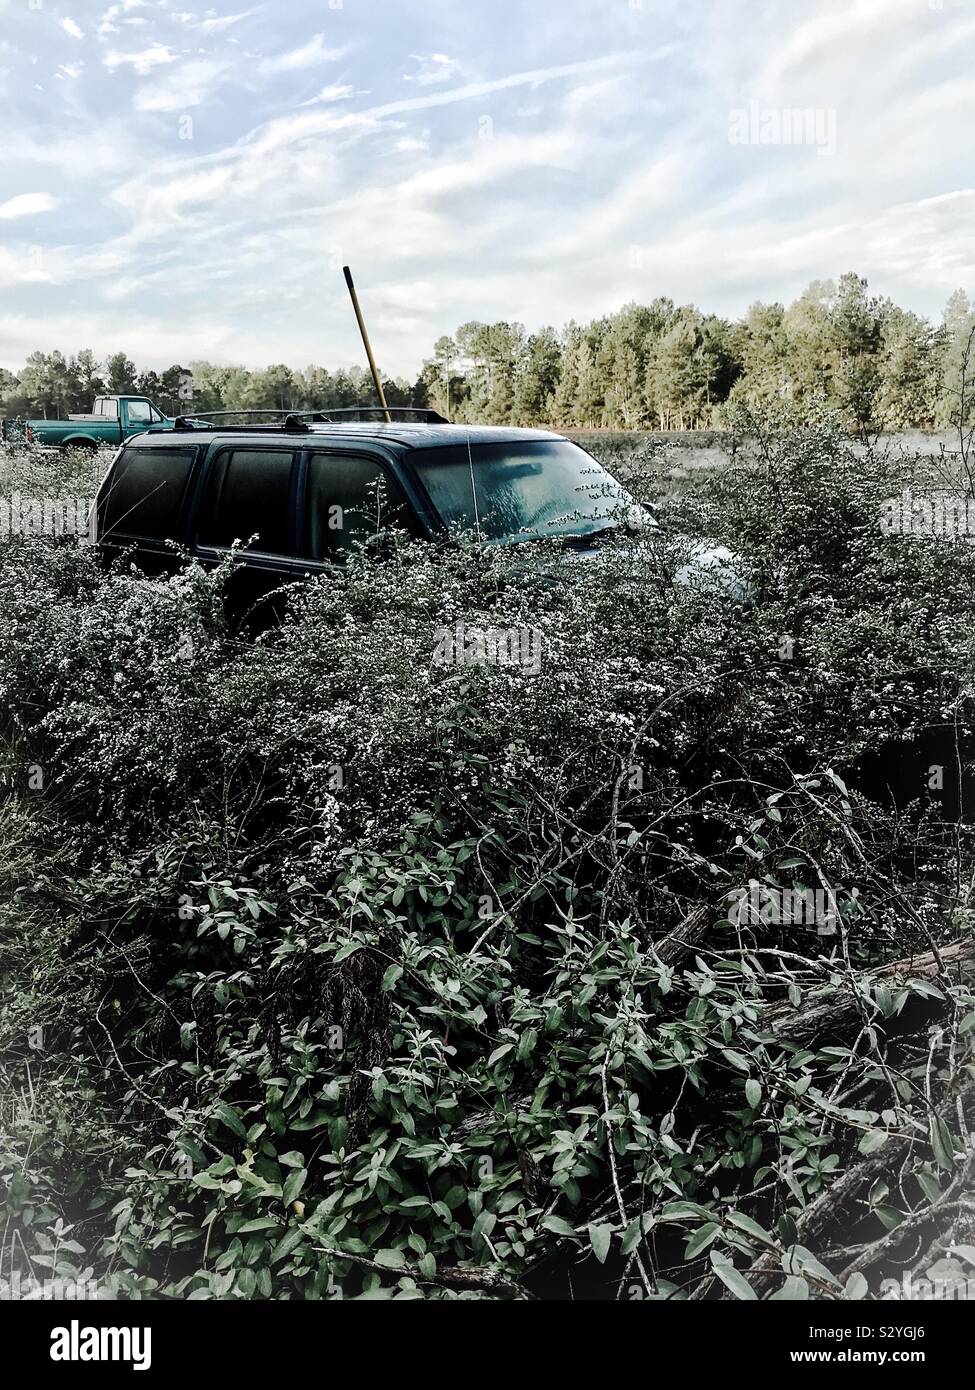 Frost Asters encroach on parked SUV in North Carolina farm field Stock Photo